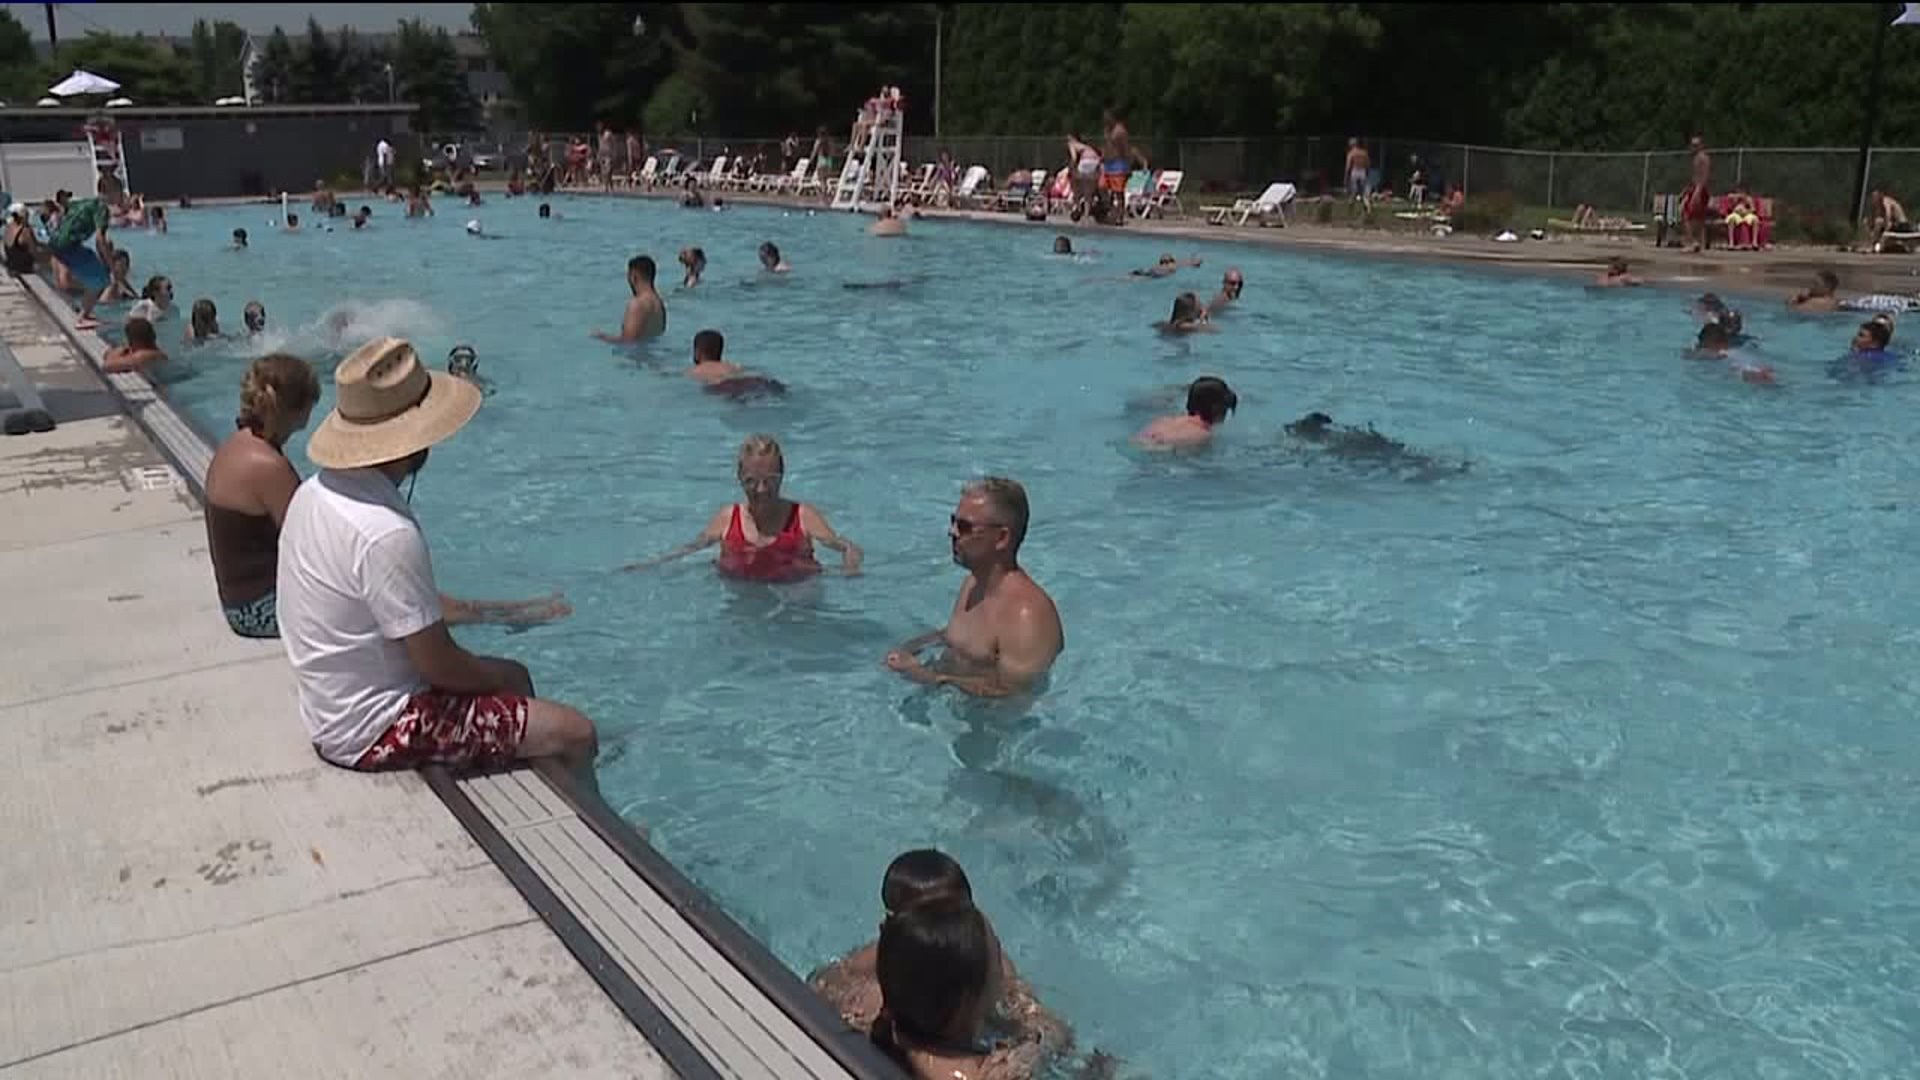 Popular Day at the Public Pool